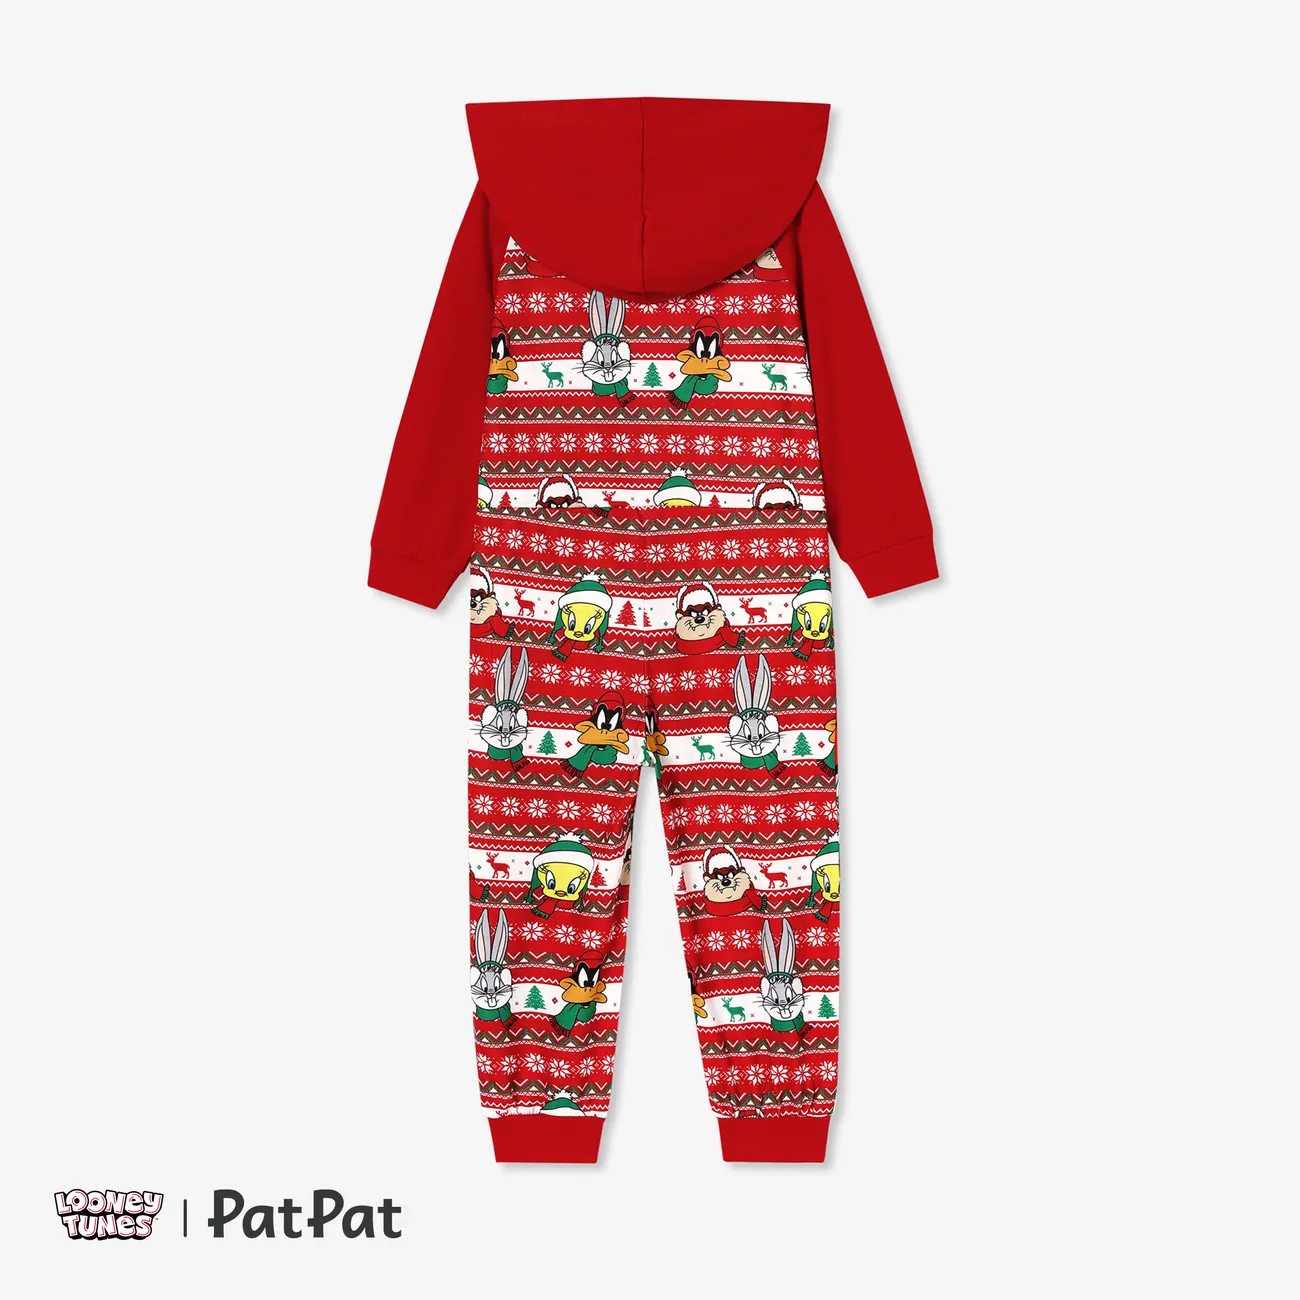 Looney Tunes Weihnachten Familien-Looks Langärmelig Familien-Outfits Pyjamas (Flame Resistant) rot big image 1